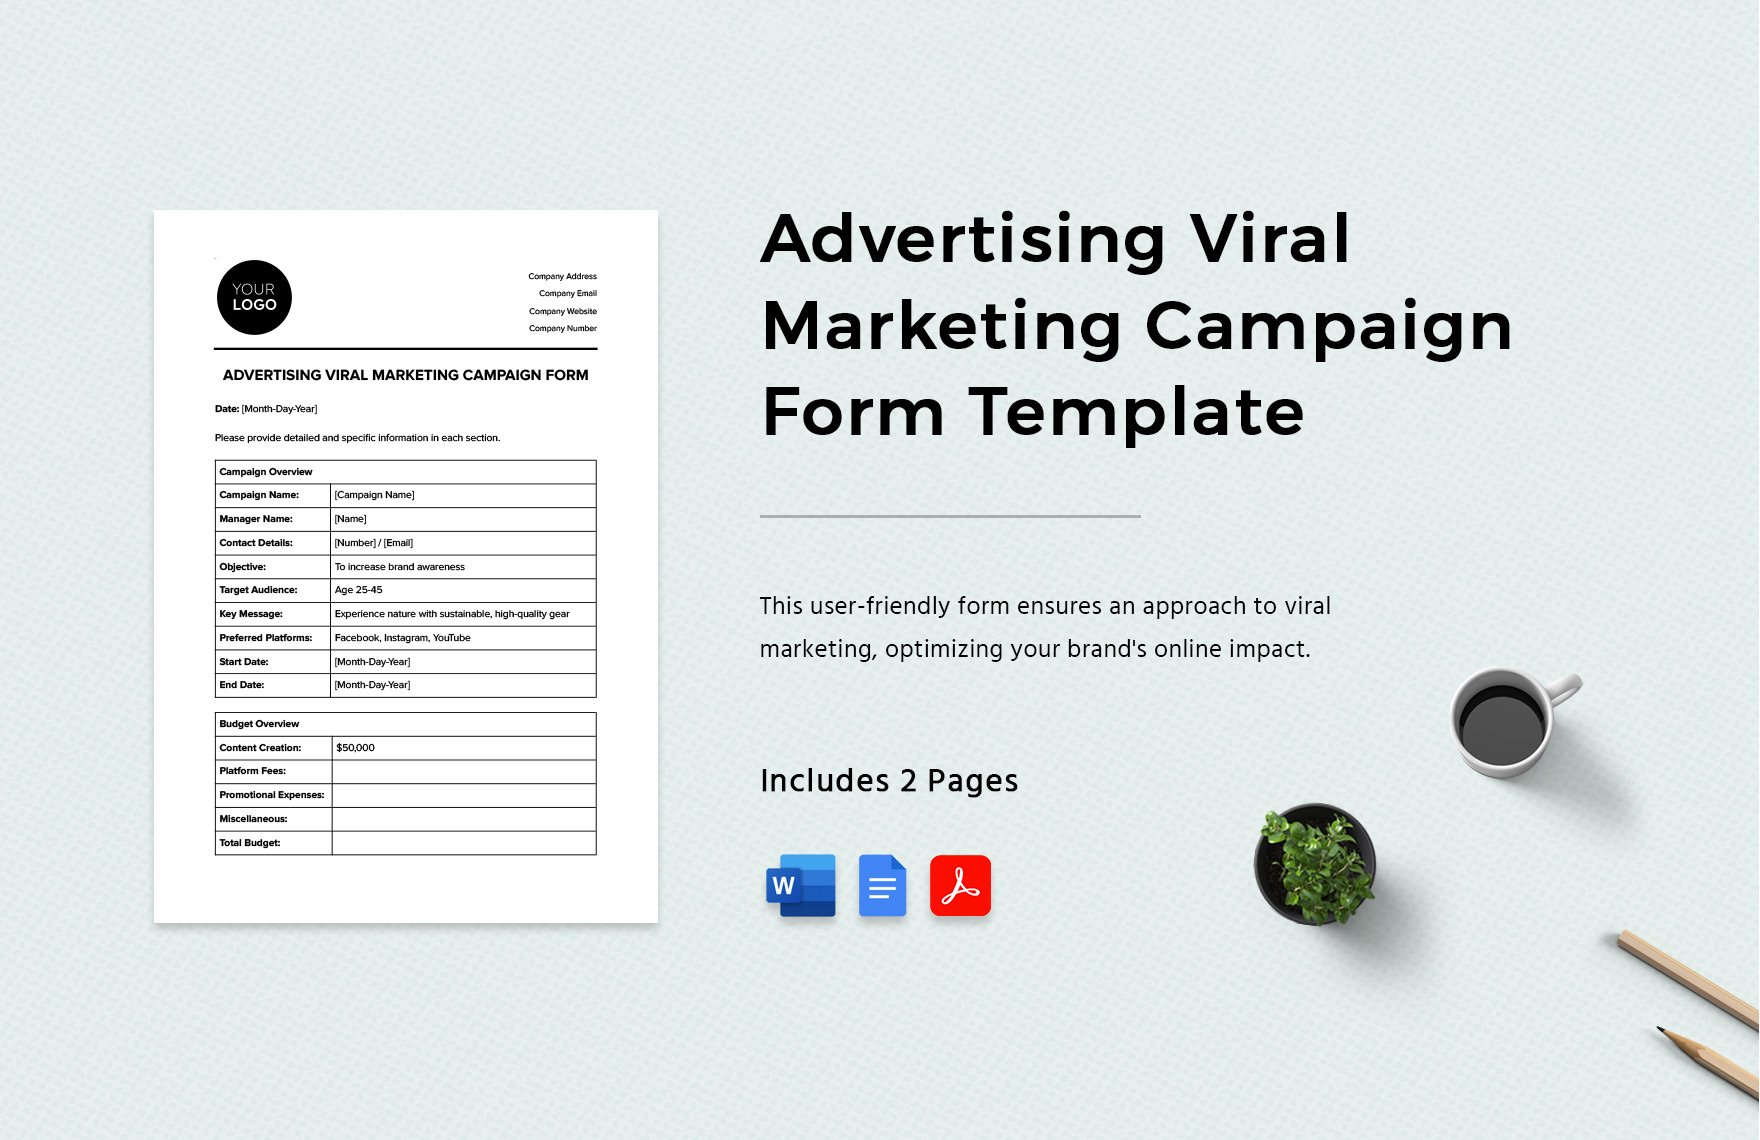 Advertising Viral Marketing Campaign Form Template in Word, Google Docs, PDF